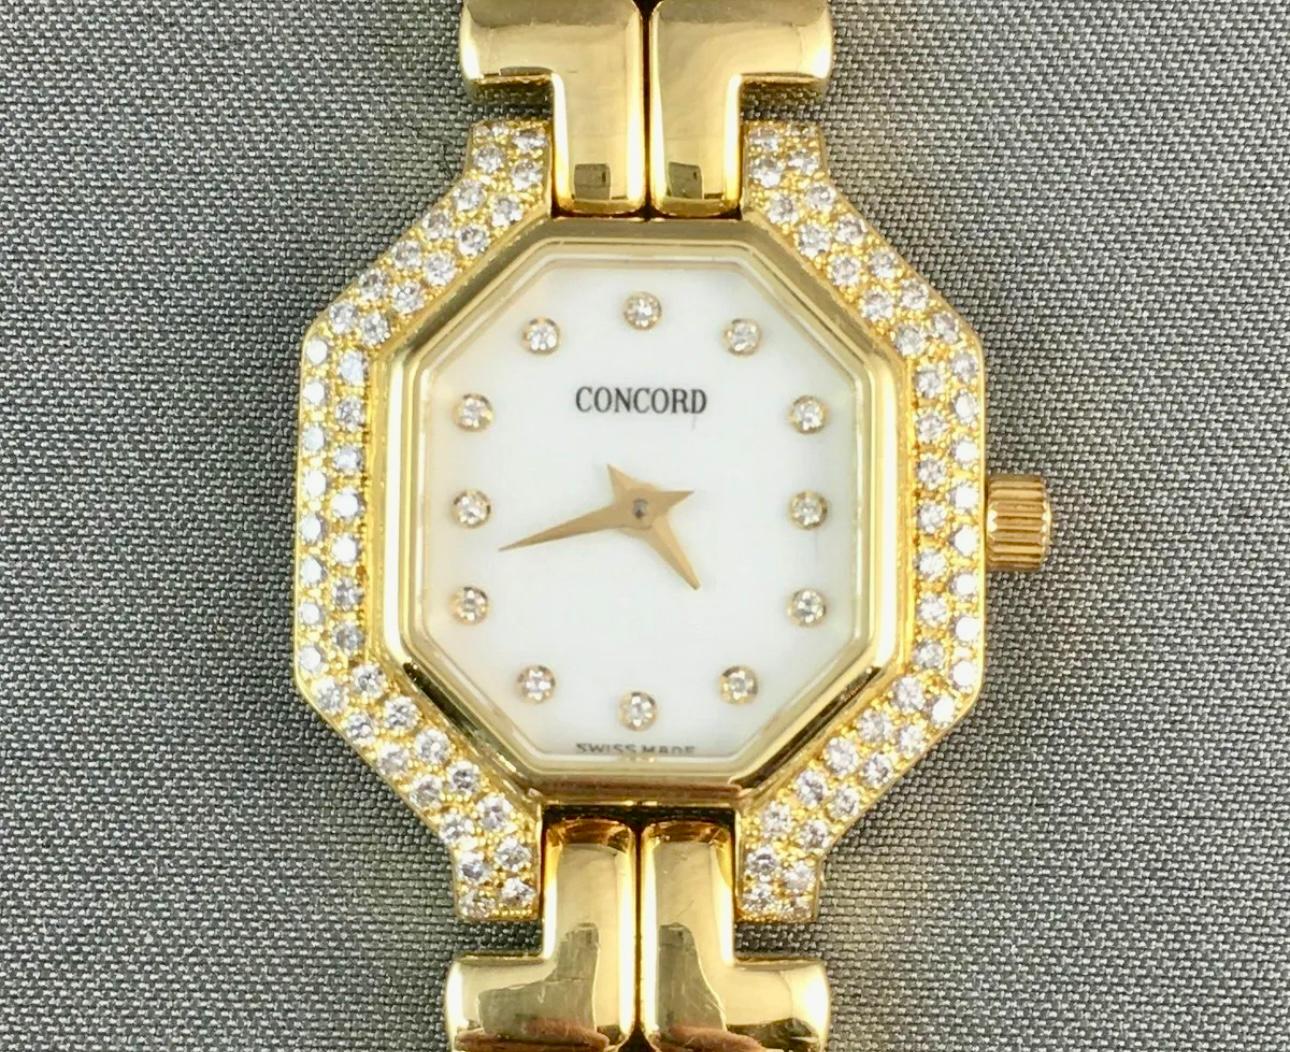 Concord 18k Gold & Diamond Ladies Watch Ref. #51.25.160, Mother of Pearl Dial For Sale 1